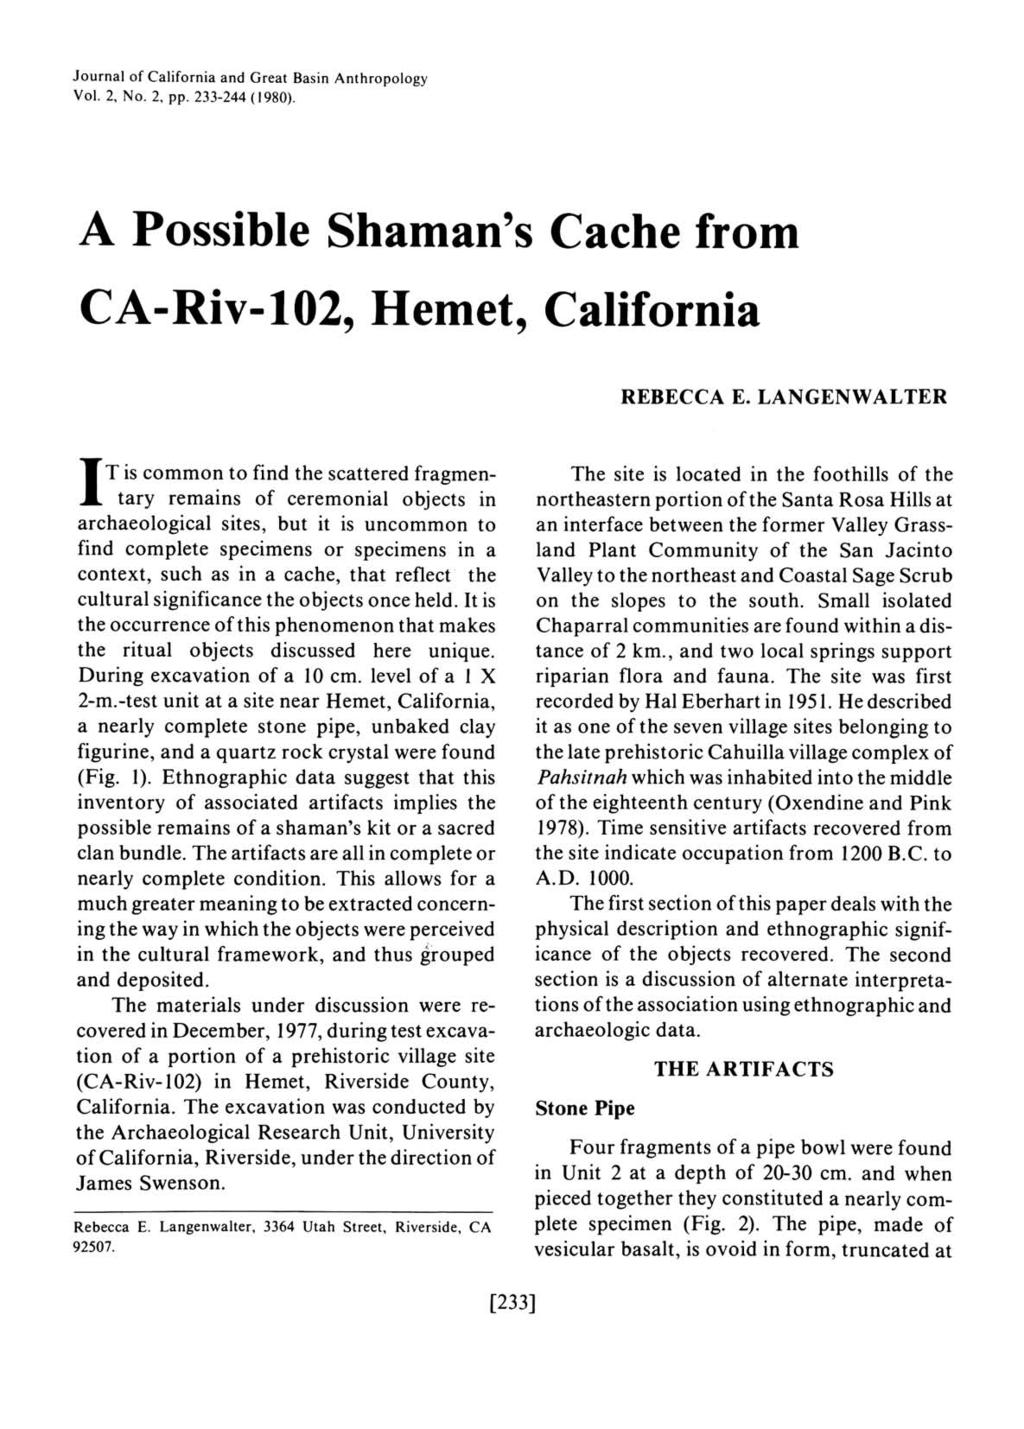 Journal of California and Great Basin Anthropology Vol. 2, No. 2, pp. 233-244 (1980). A Possible Shaman's Cache from CA-Riv-102, Hemet, California REBECCA E.